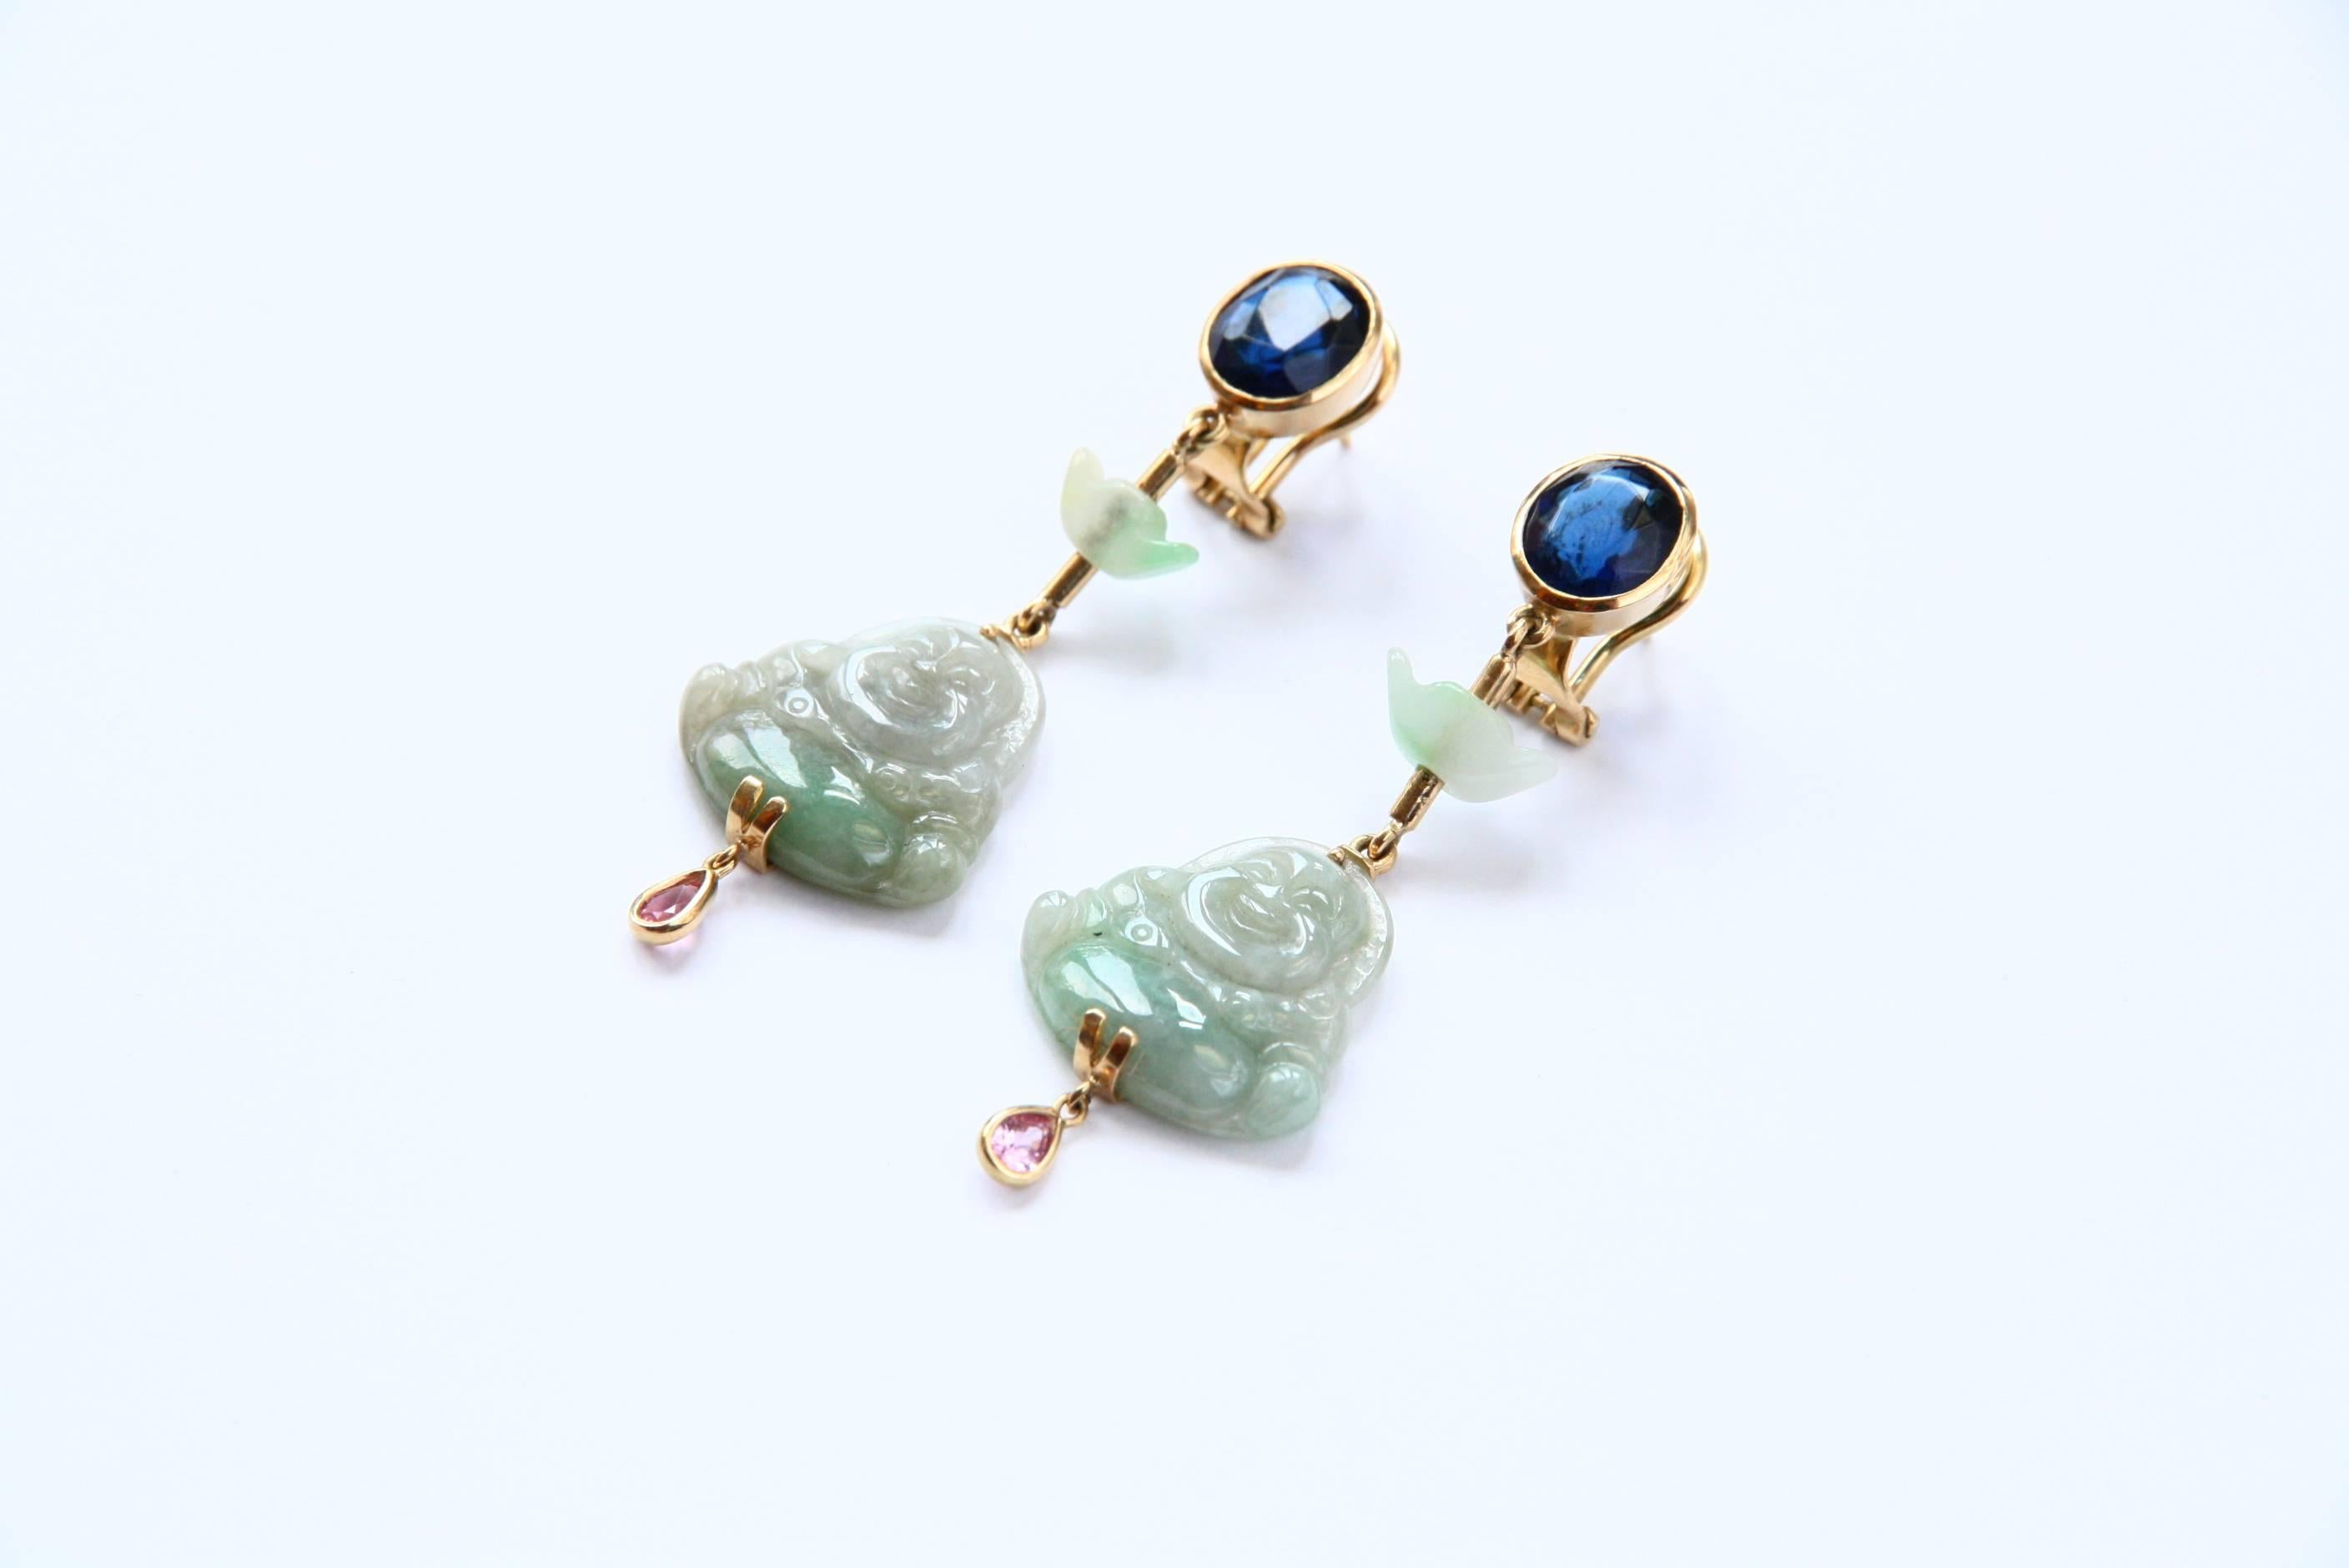 Amazing antiques jade representing carved buddha, 2 very hight quality blu sapphire cts 3,60 and 2 pink cabochon  tourmaline  drops 18kt gold gr.14, total length 6cm.
All Giulia Colussi jewelry is new and has never been previously owned or worn.